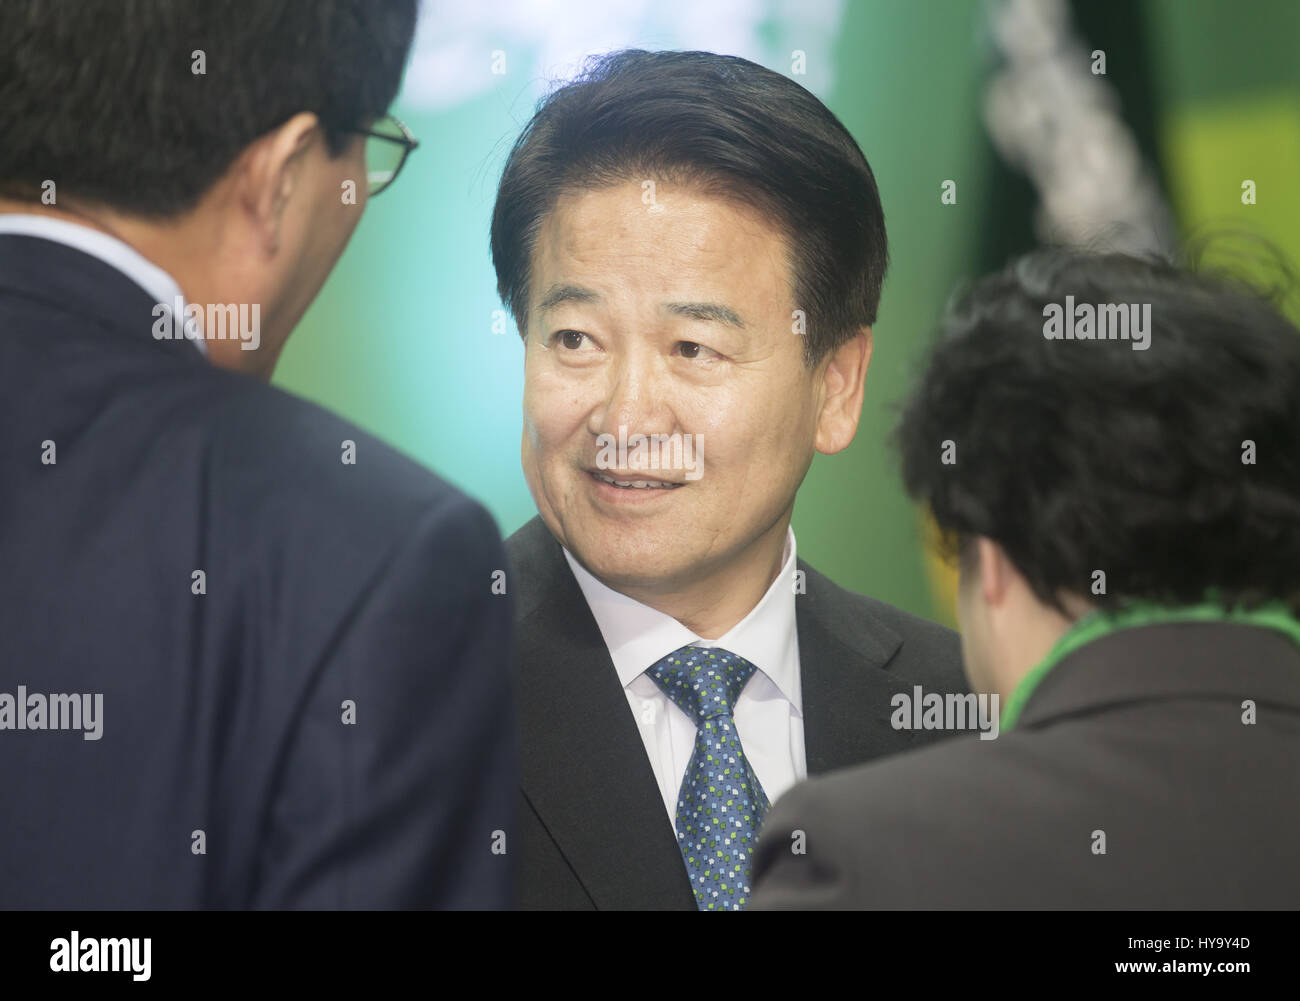 Seoul, South Korea. 2nd Apr, 2017. Chung Dong-Young, Apr 2, 2017 : Chung Dong-Young (C), a lawmaker of the People's Party, arrives to observe a party primary in Seoul, South Korea. South Korea's presidential election will be held on May 9 after official 22-day campaign period from April 17. Credit: Lee Jae-Won/AFLO/Alamy Live News Stock Photo